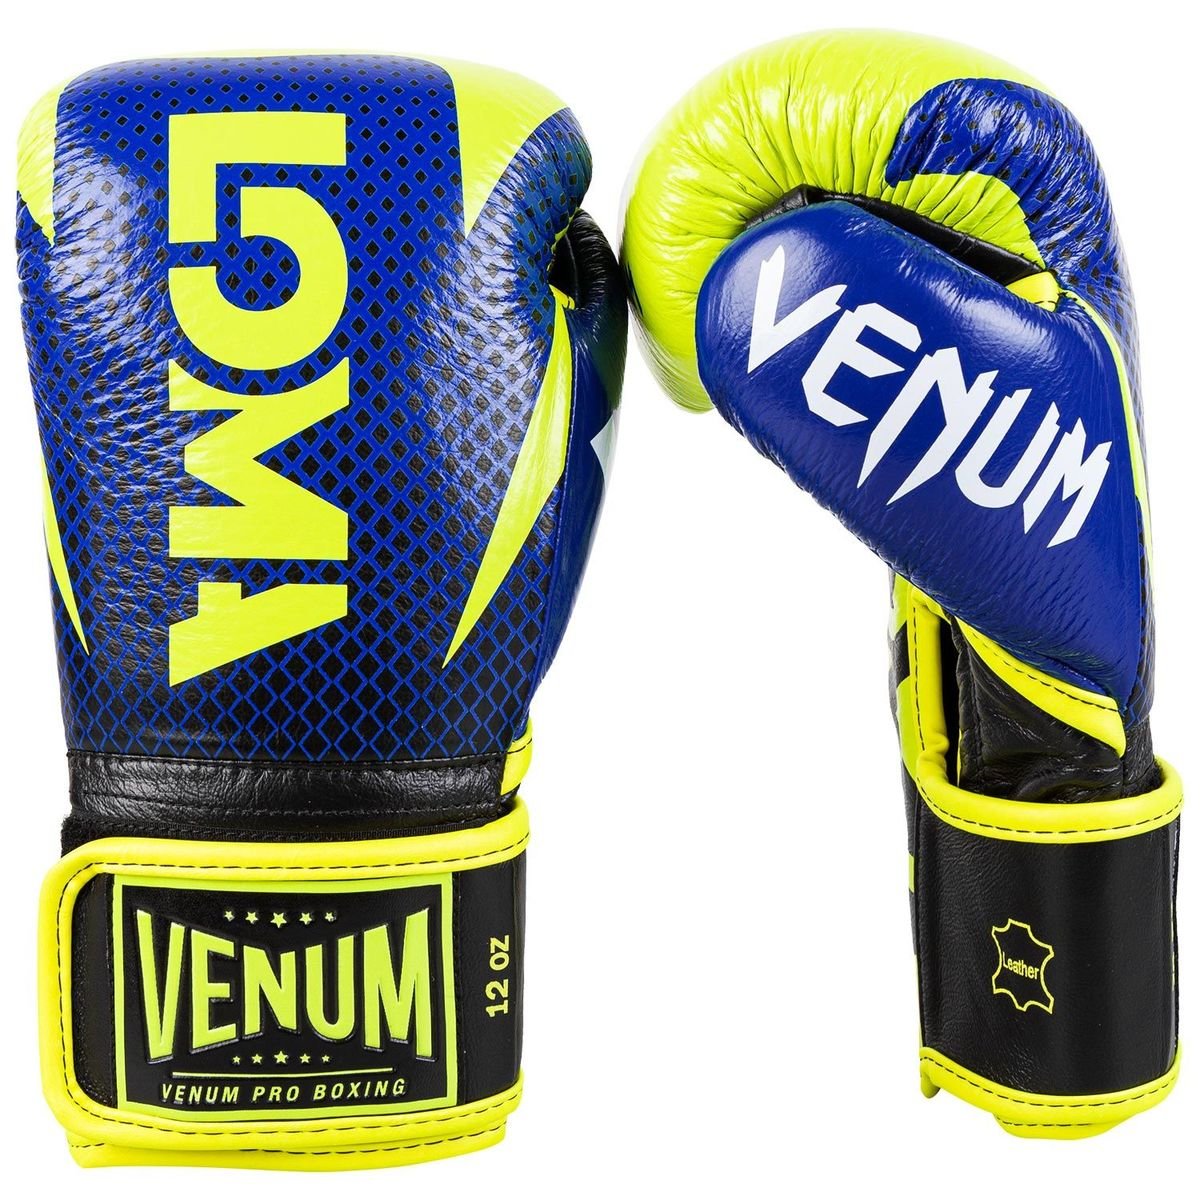 HAMMER GLOVES AAGsport EDITION THAI – LOMA VELCRO VENUM-03912-405 MUAY BOXING PRO